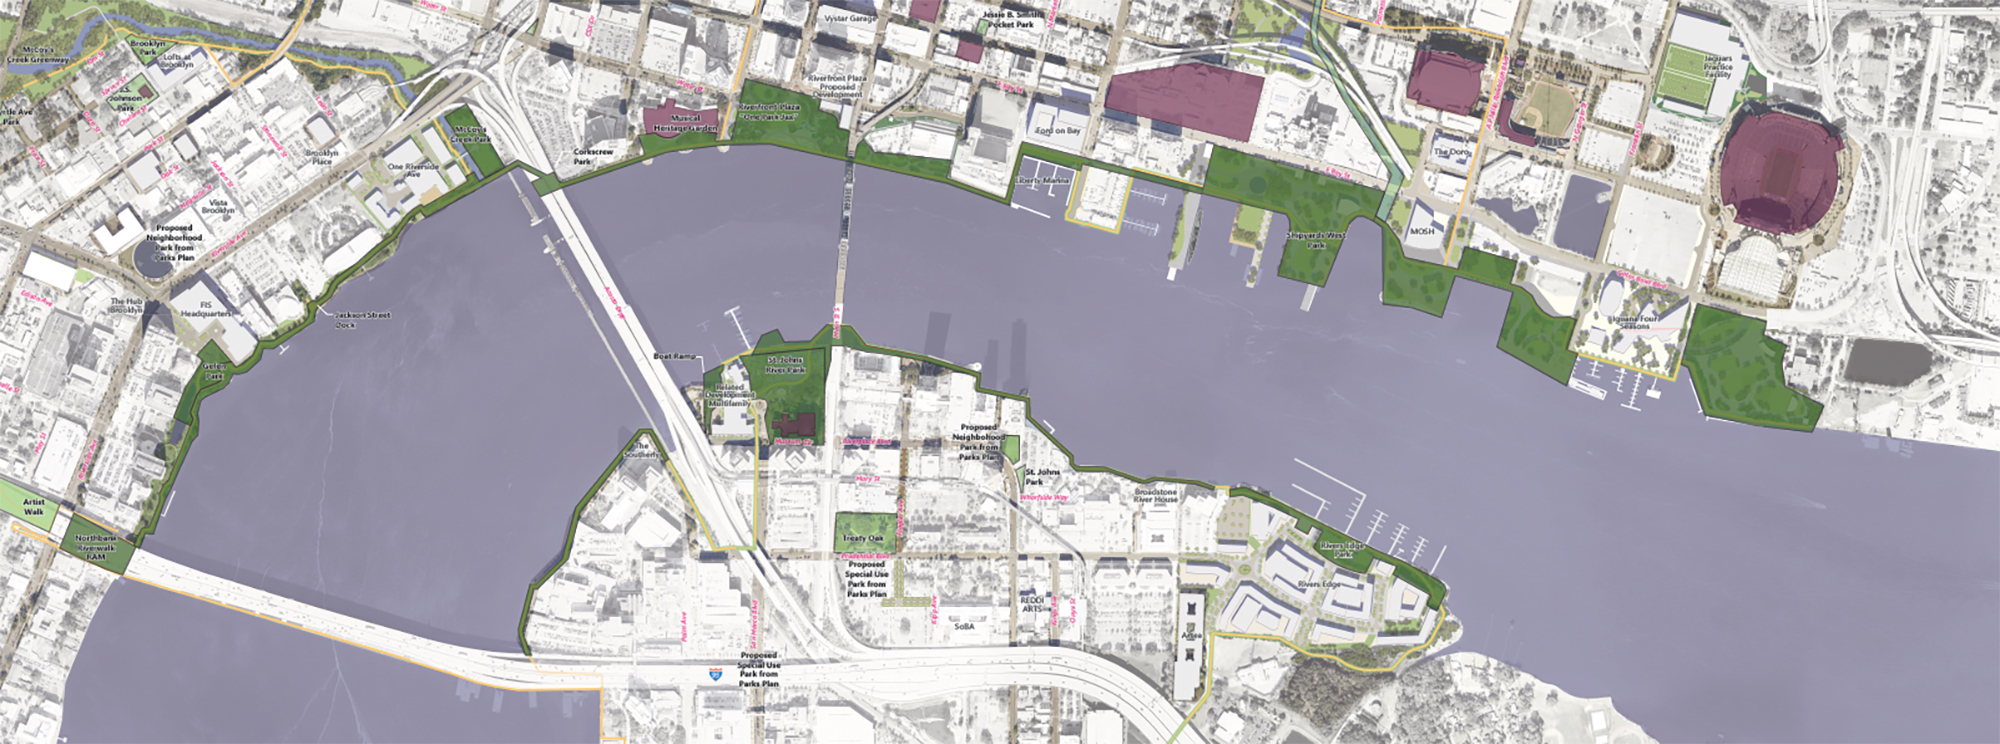 The areas highlighted in green are planned or current park space along the St. Johns River Downtown in the city’s master plan for the area. The purple areas are other public facilities, such as TIAA Bank Field.